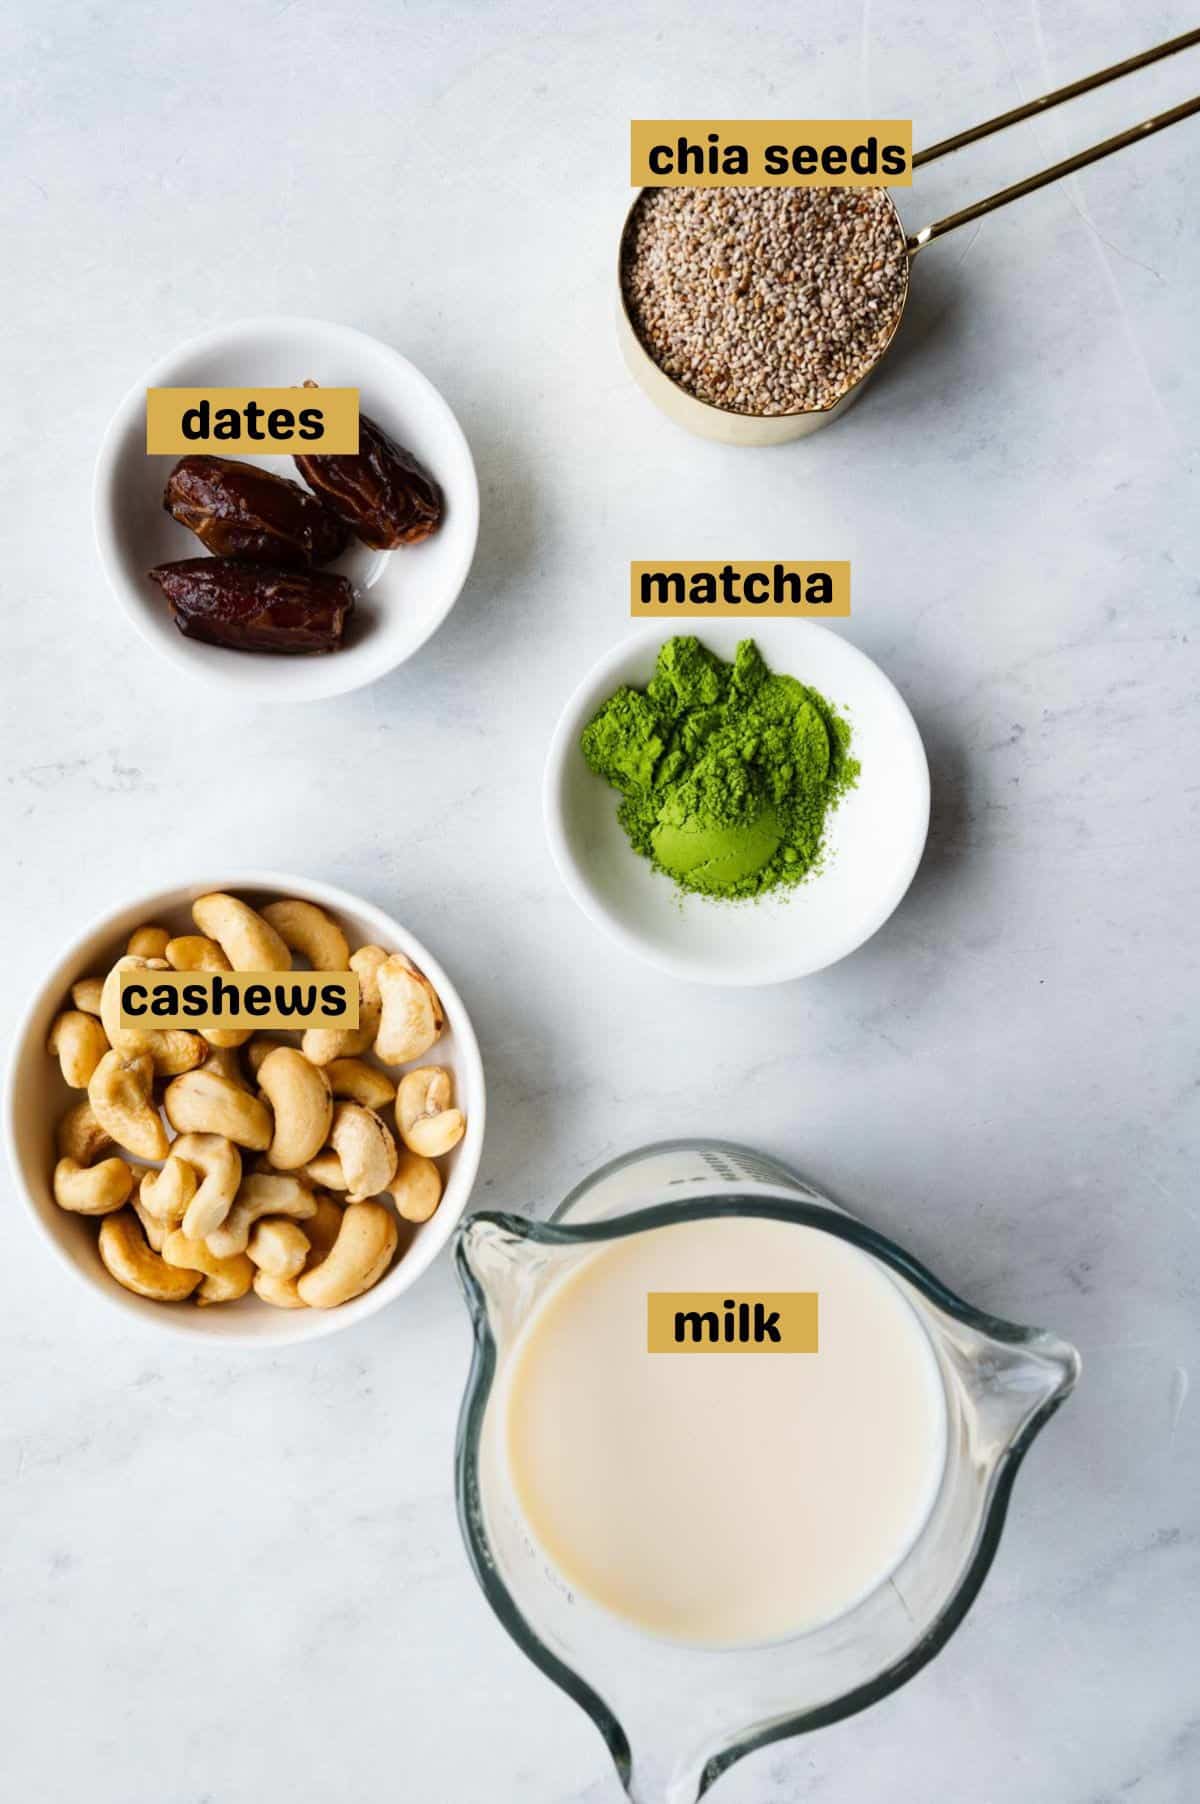 Chia seeds in a gold measuring cup, dates in a small white bowl, matcha powder and cashews in small white bowls, and milk in a glass beaker.